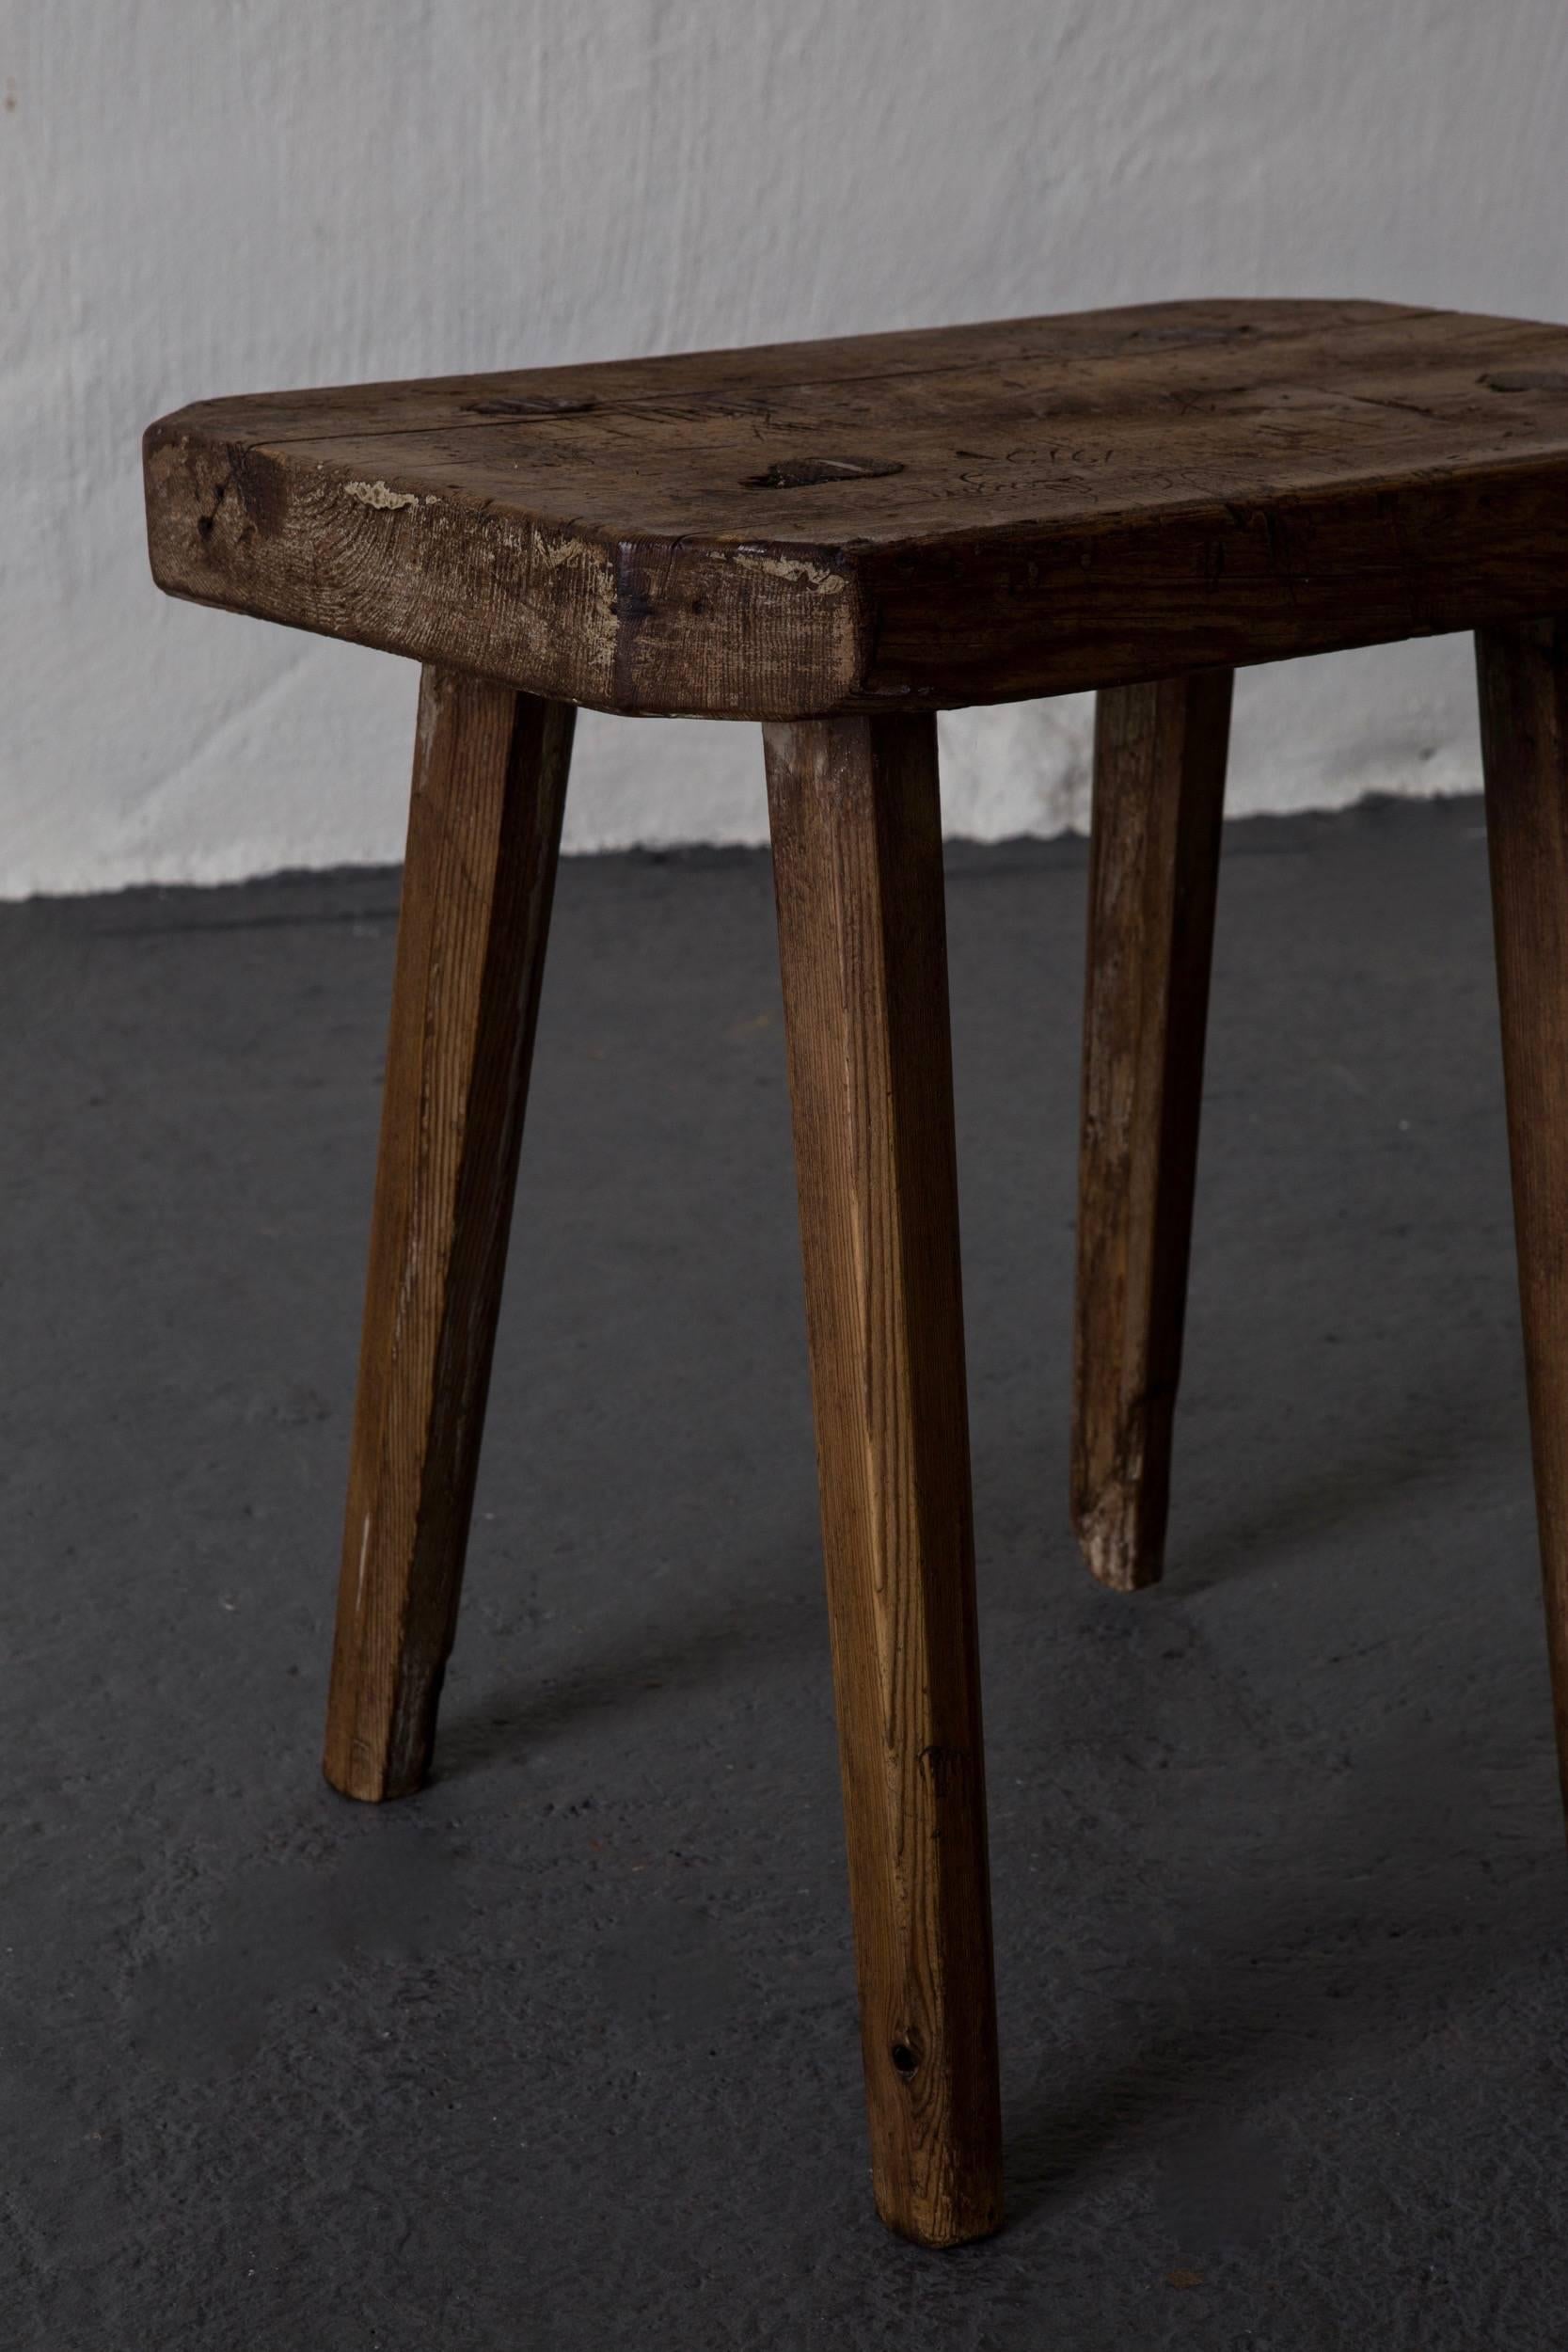 Stools Benches Rustic Wood Swedish 19th Century, Sweden 1